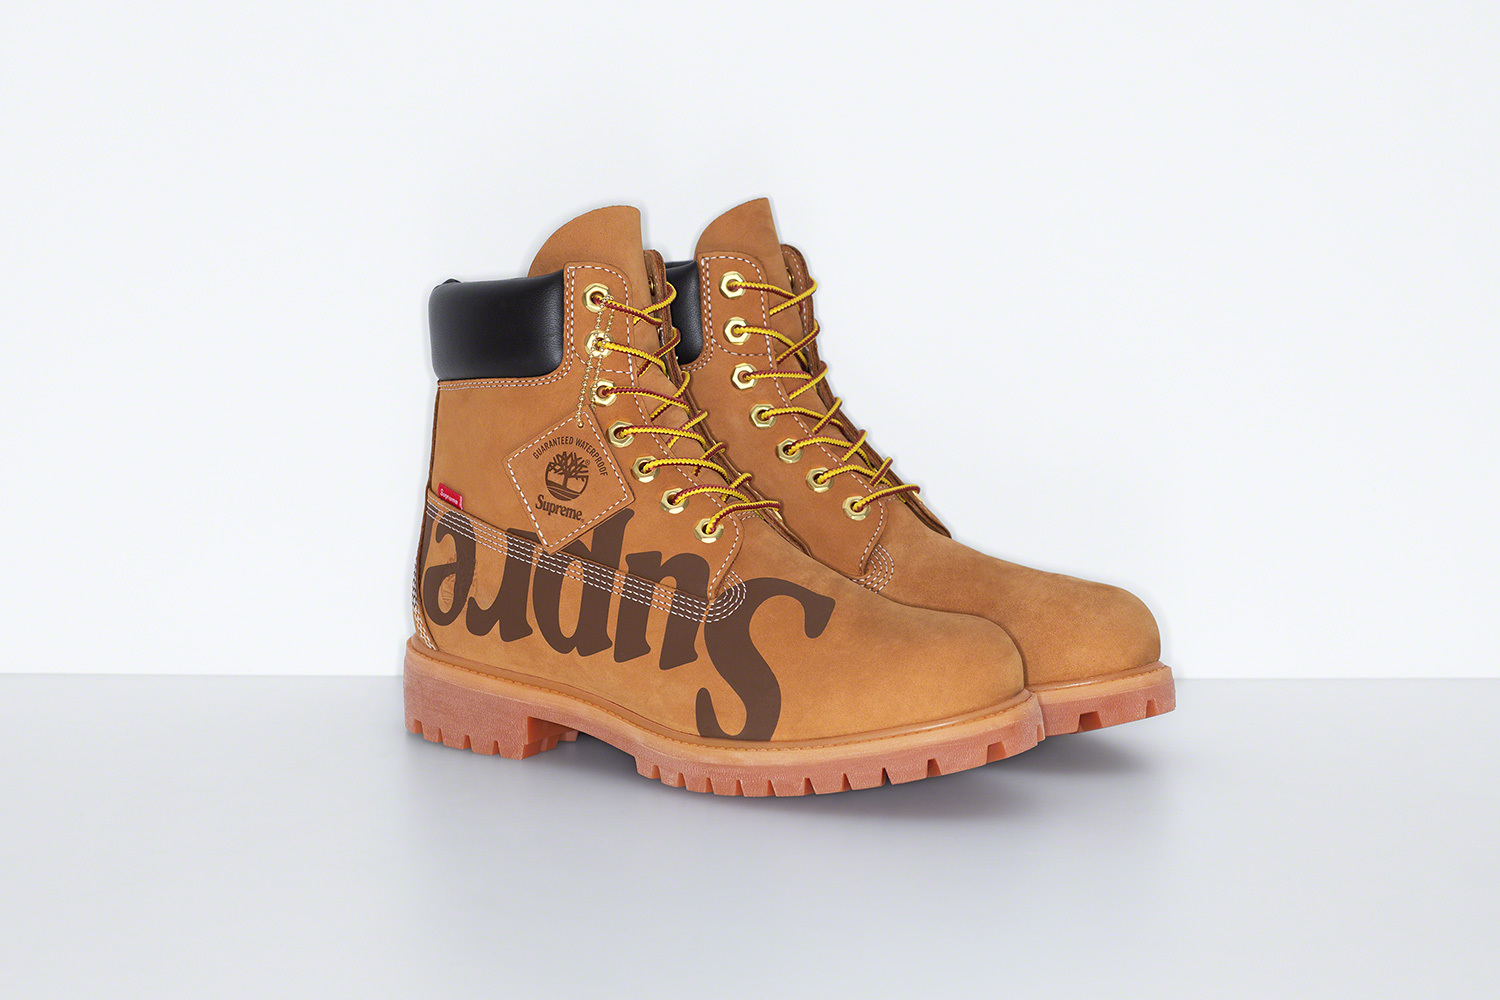 Supreme and Timberland Reveal Their Fall 2020 Collab